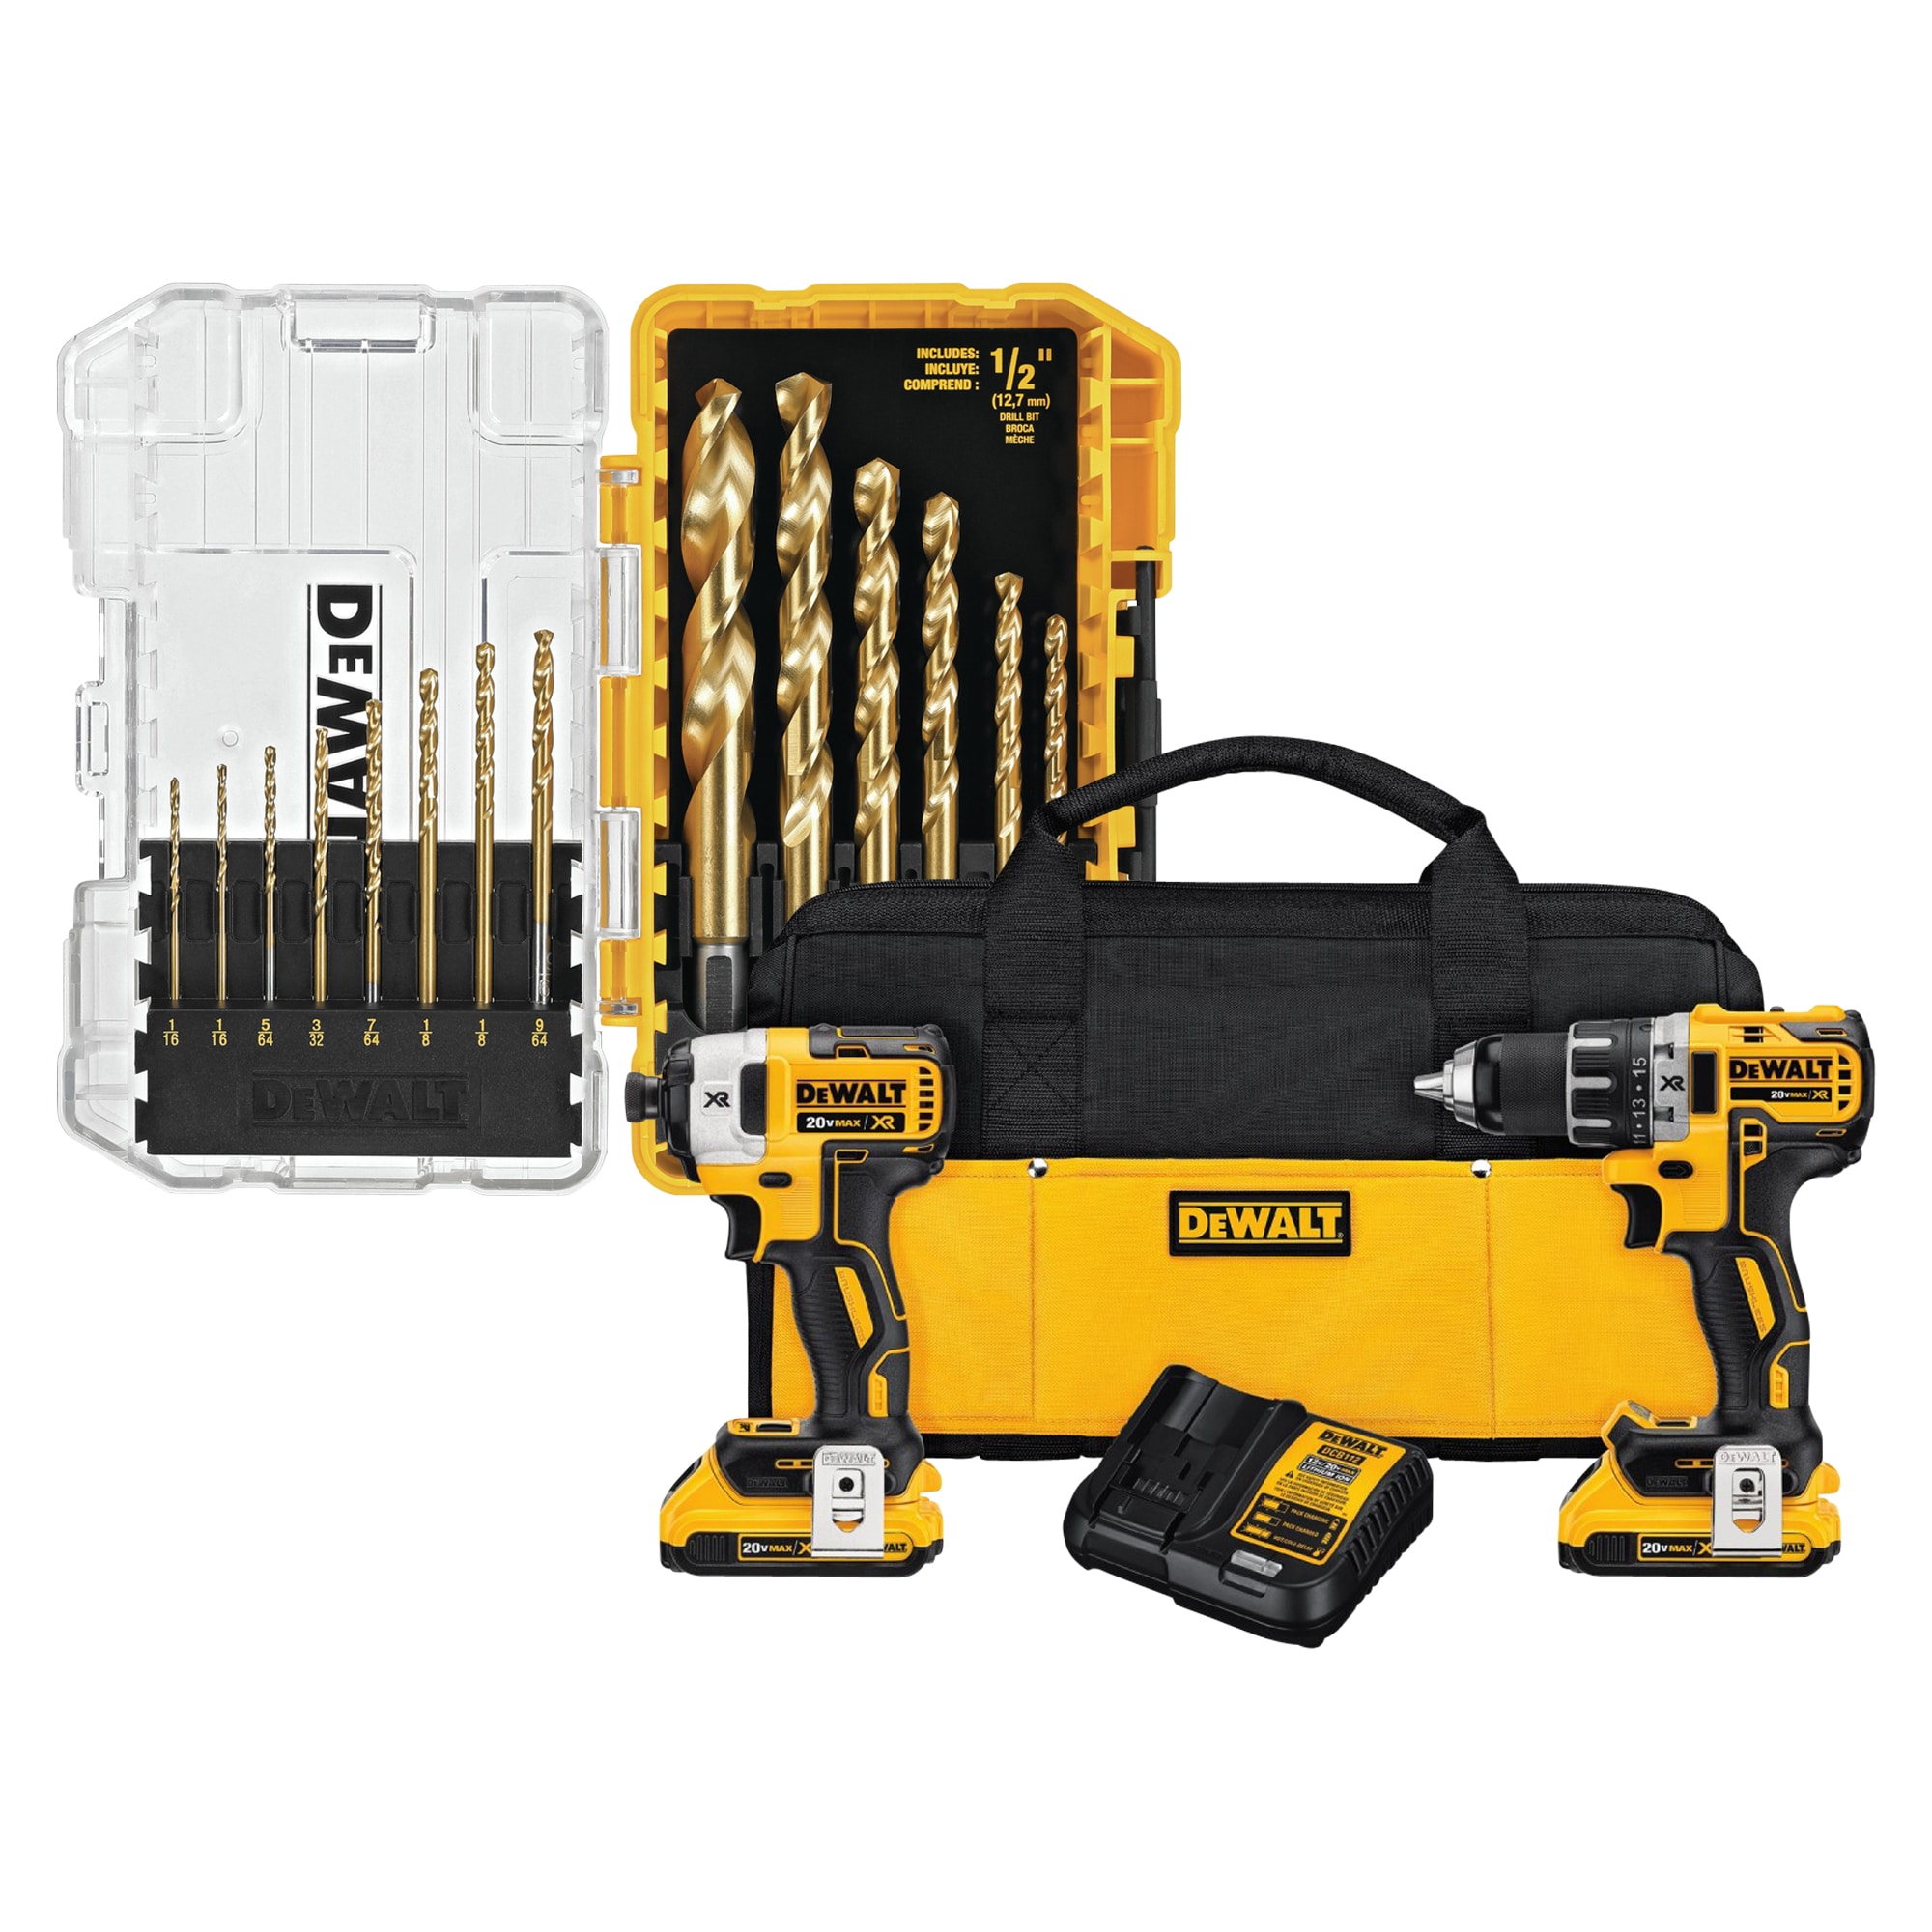 DEWALT XR 2-Tool 20-Volt Max Brushless Power Tool Combo Kit with Soft Case (2-Batteries and charger Included) & 14-Piece Assorted x Set Titanium